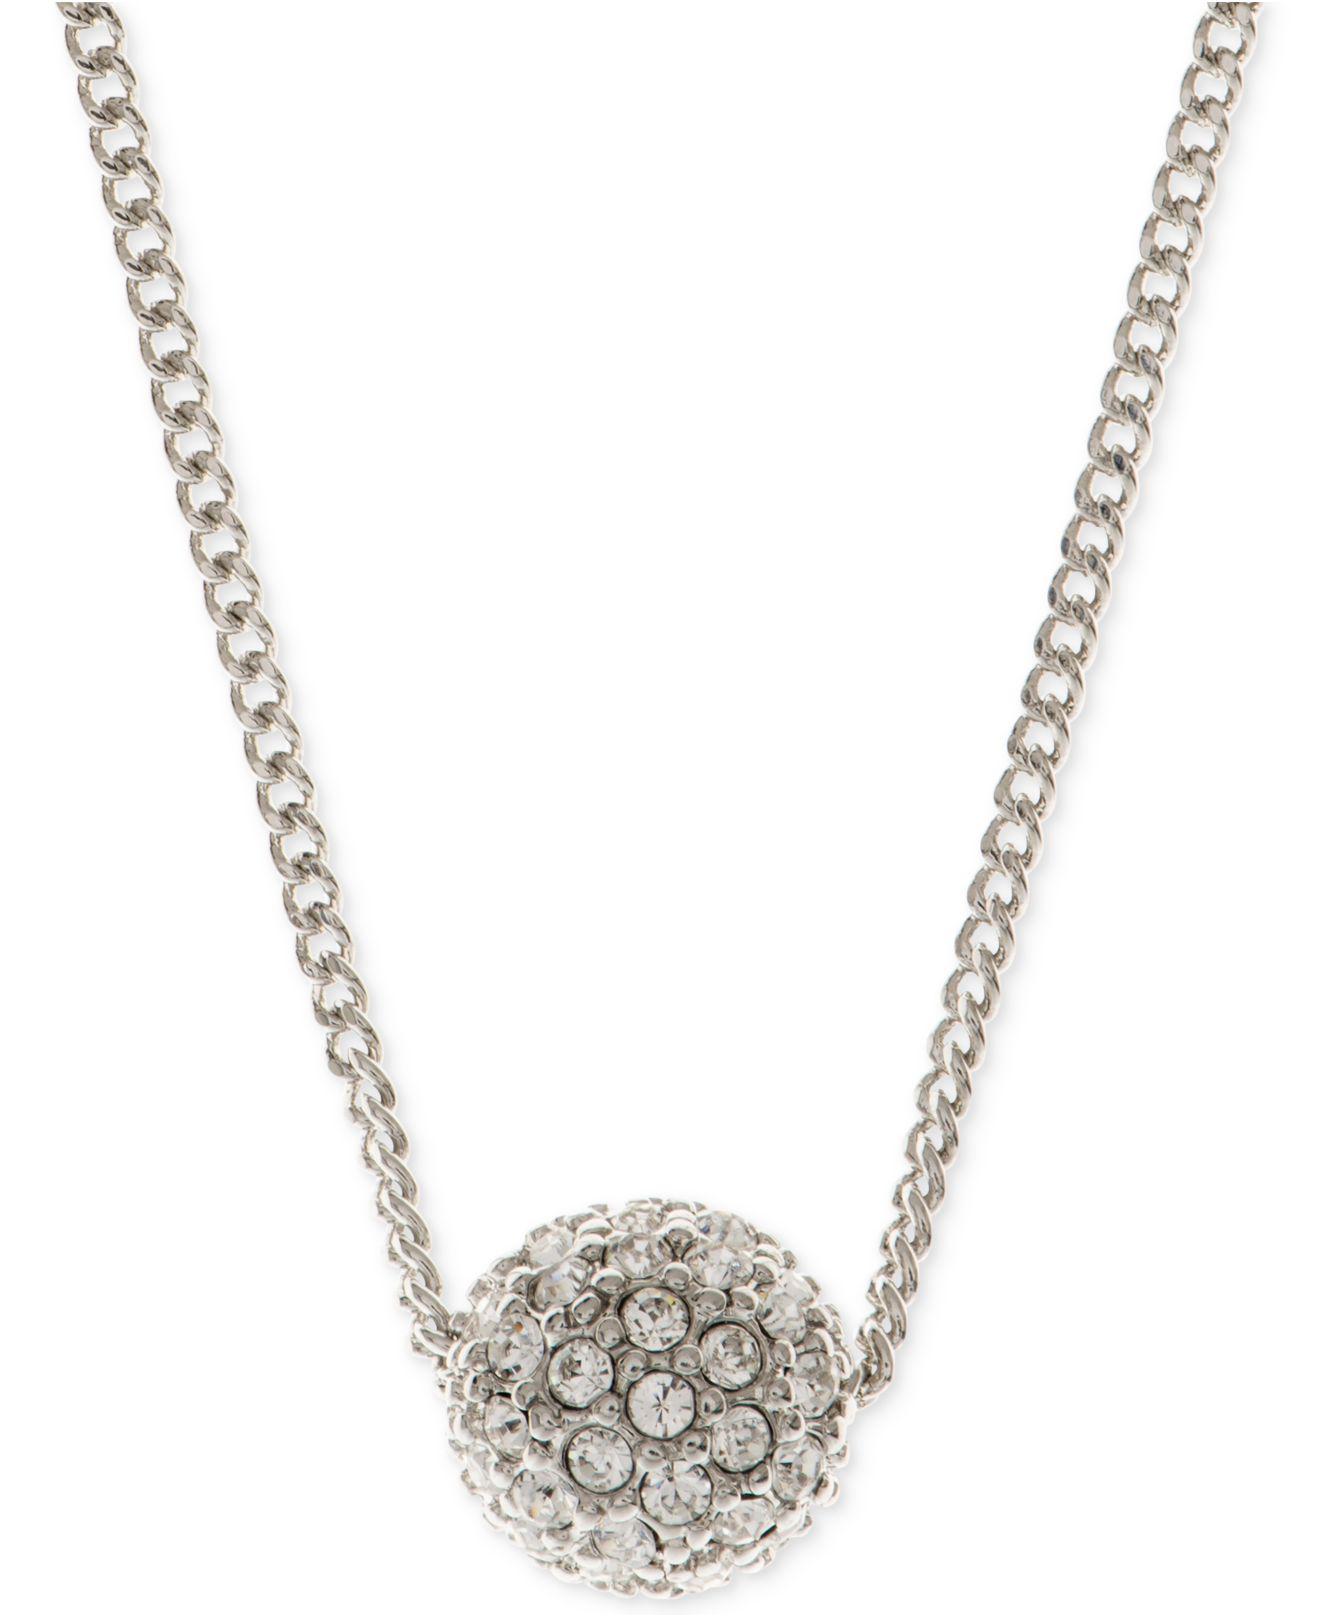 Lyst - Givenchy Silver-tone Fireball Necklace in Metallic